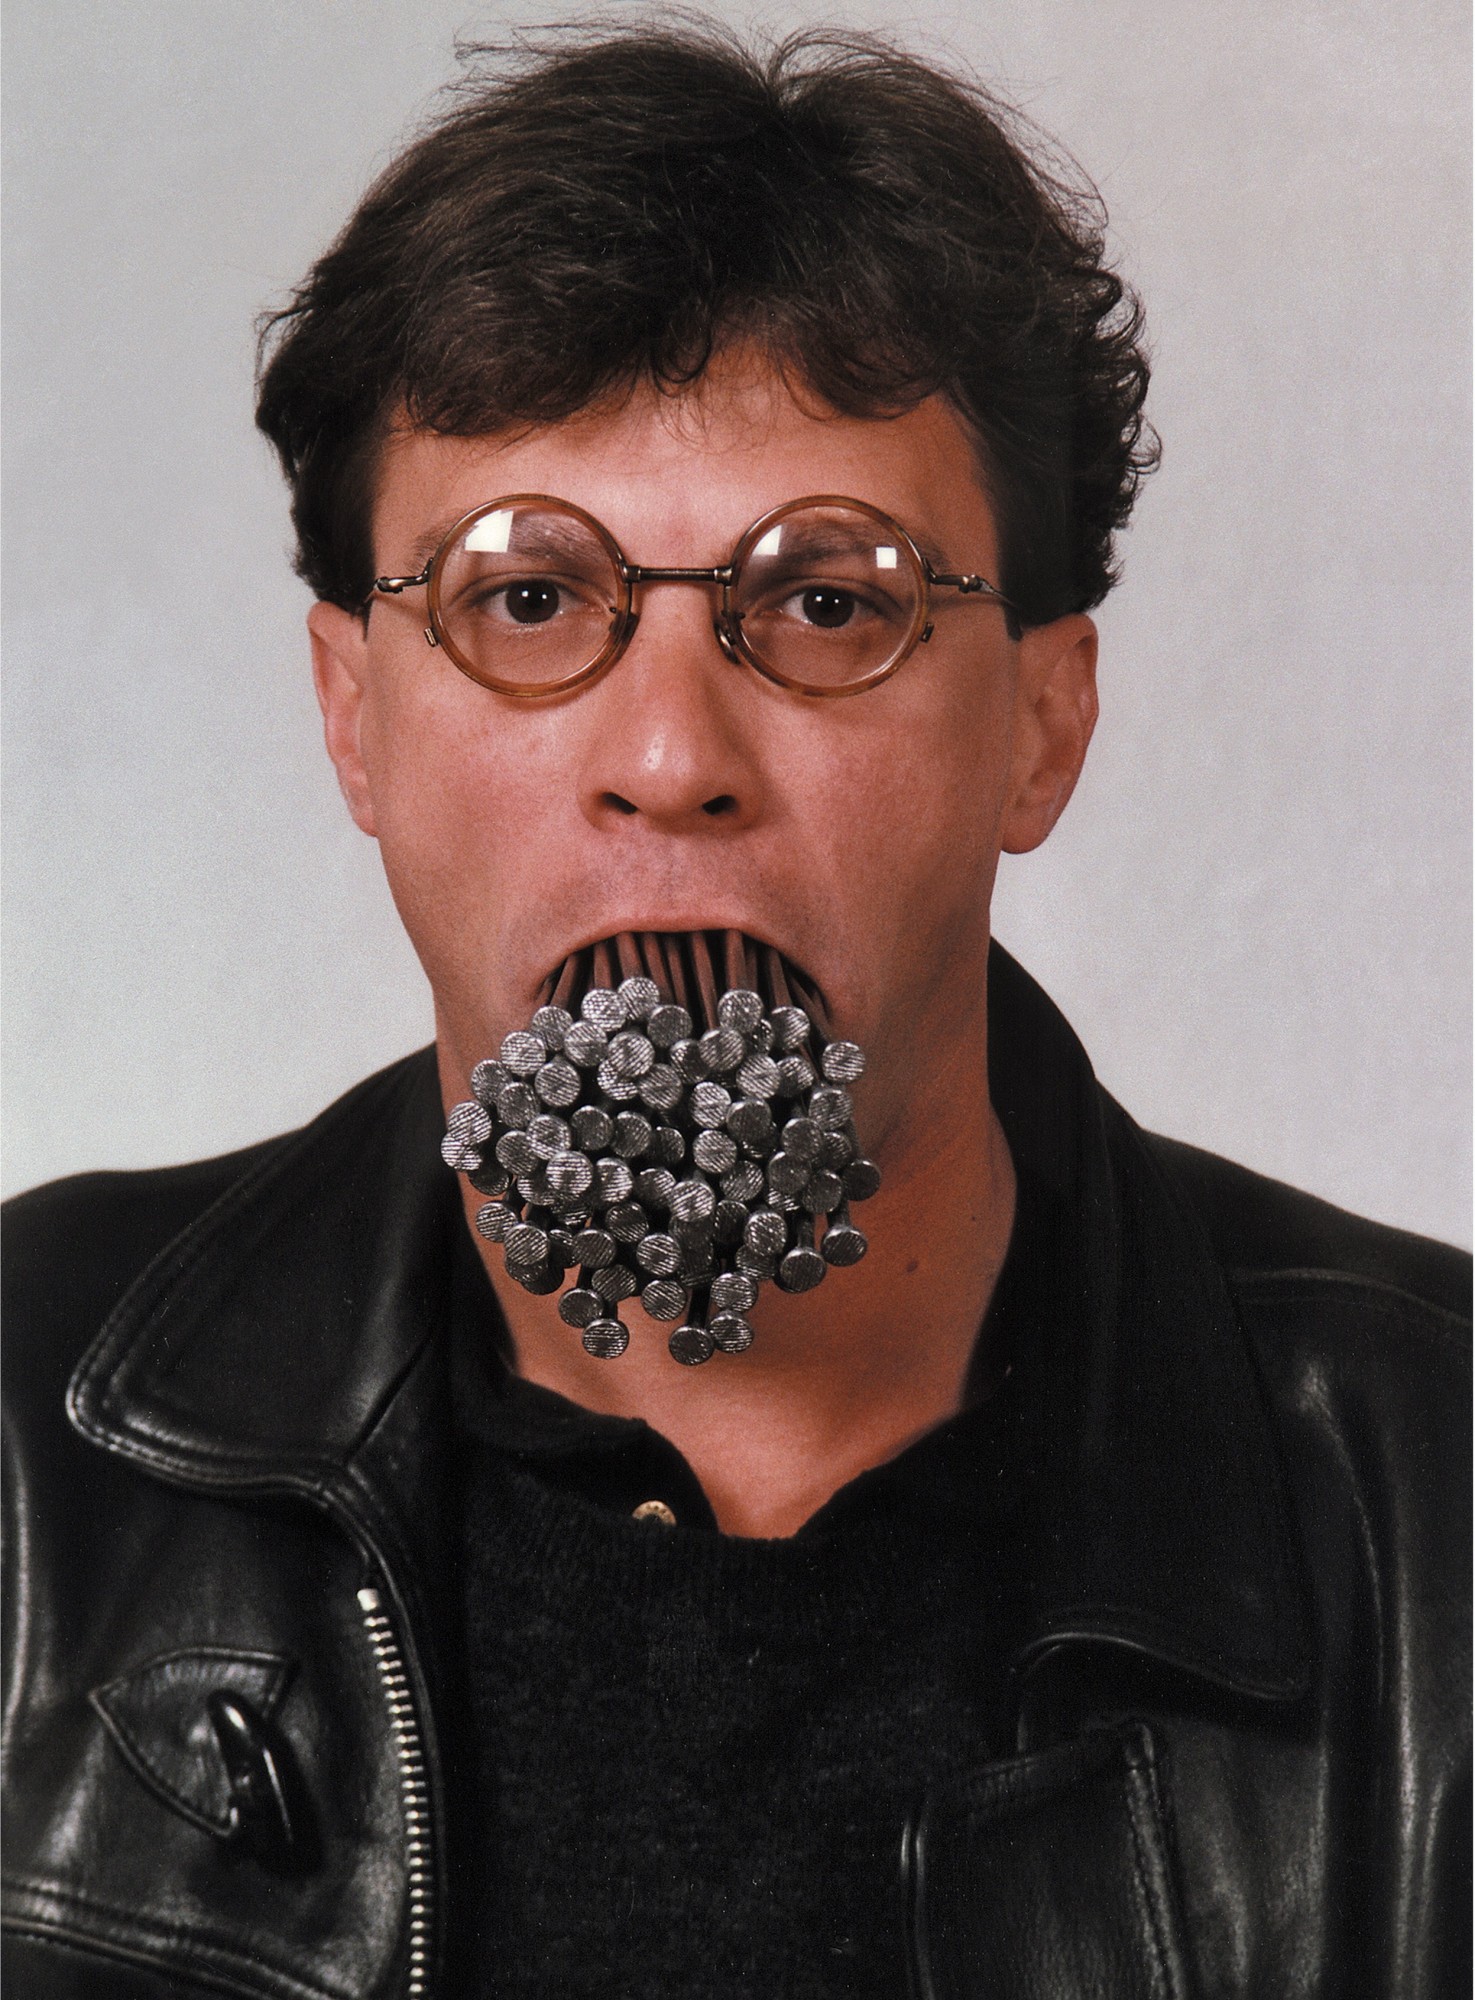 How many nails in the mouth? Self-portrait with 2kg 12.5 cm long nails in the mouth, 1992-1995, by Luchezar Boyadjiev